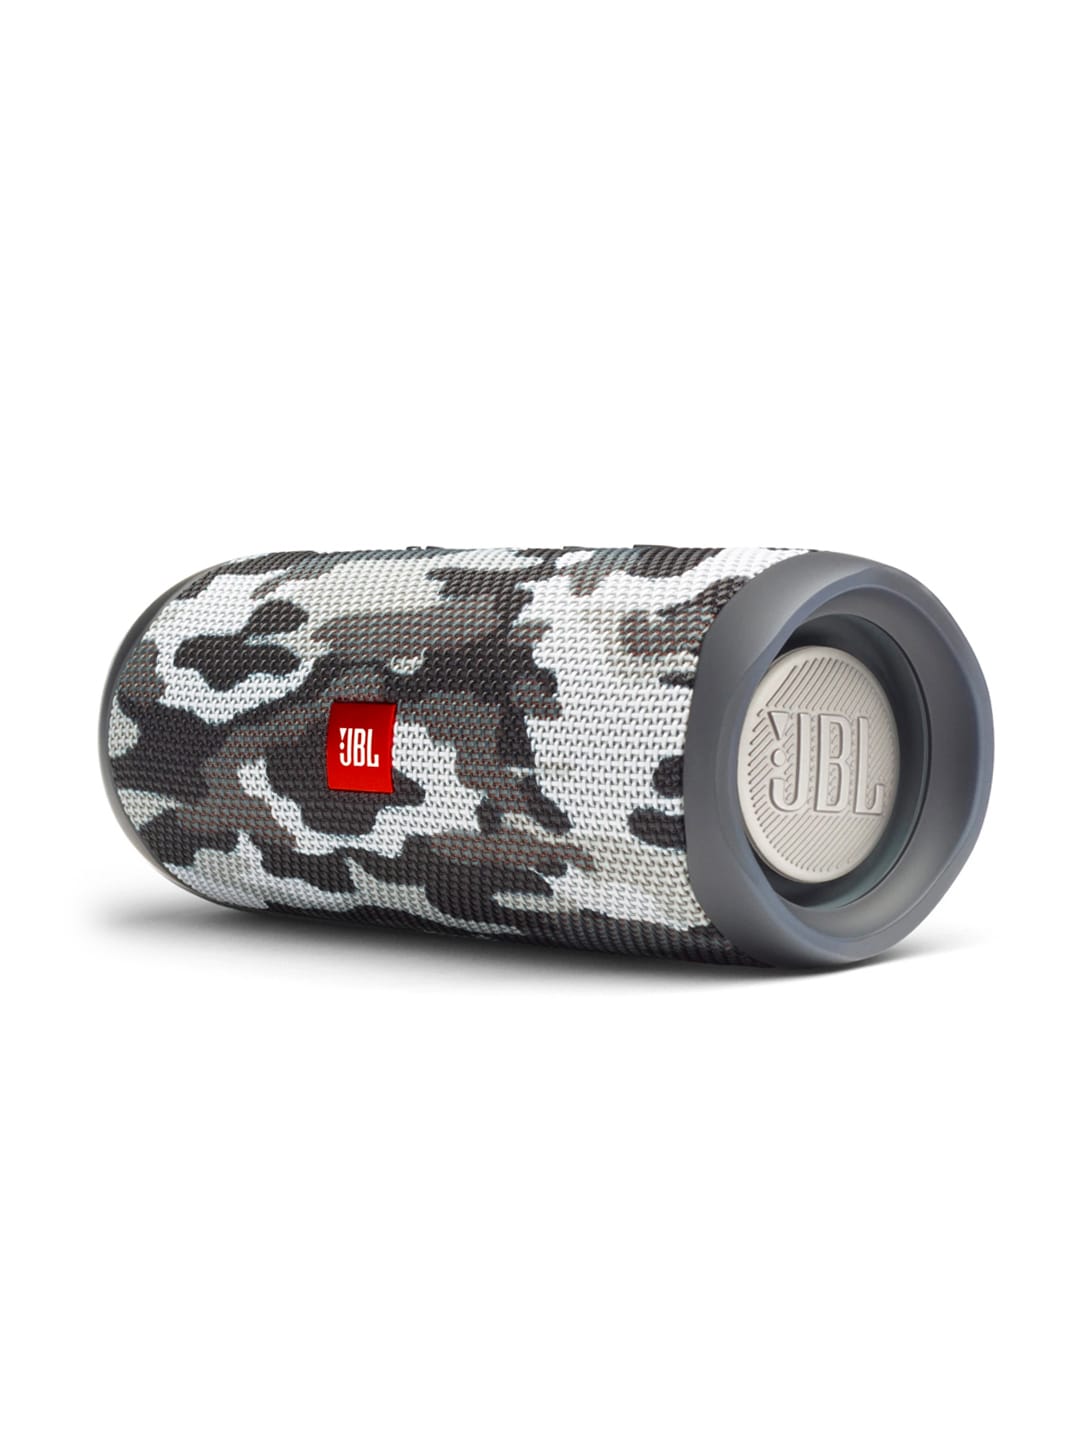 JBL Gey & White Camouflage Flip 5 20 W IPX7 Waterproof Bluetooth Speaker with PartyBoost Price in India